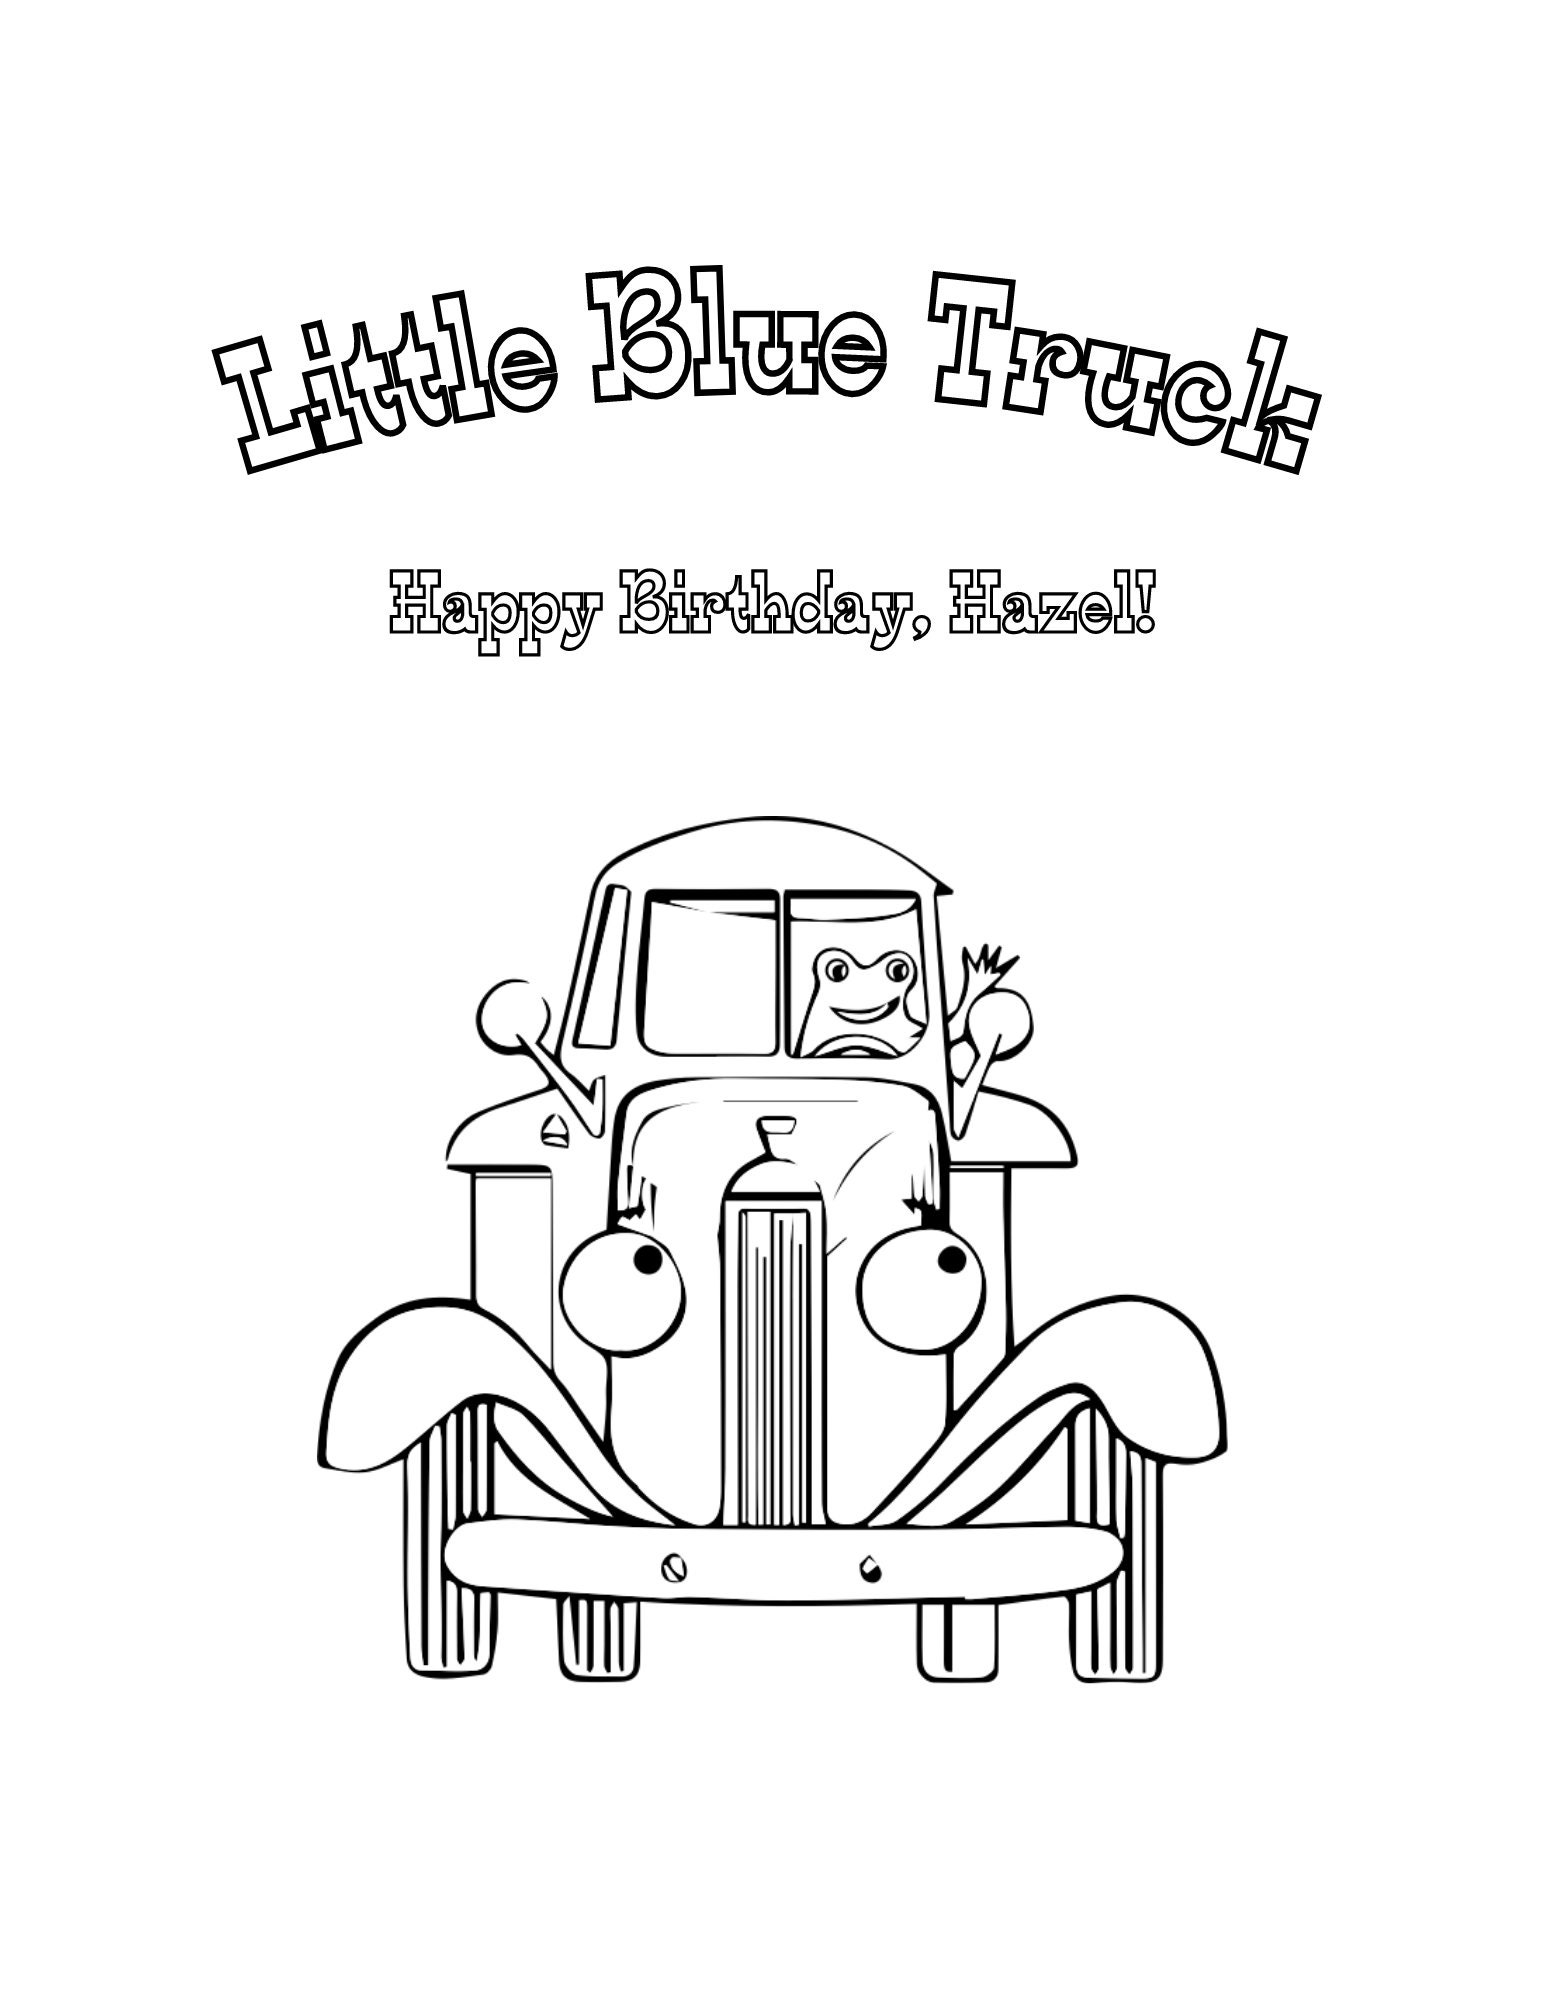 editable-personalized-little-blue-truck-coloring-book-party-etsy